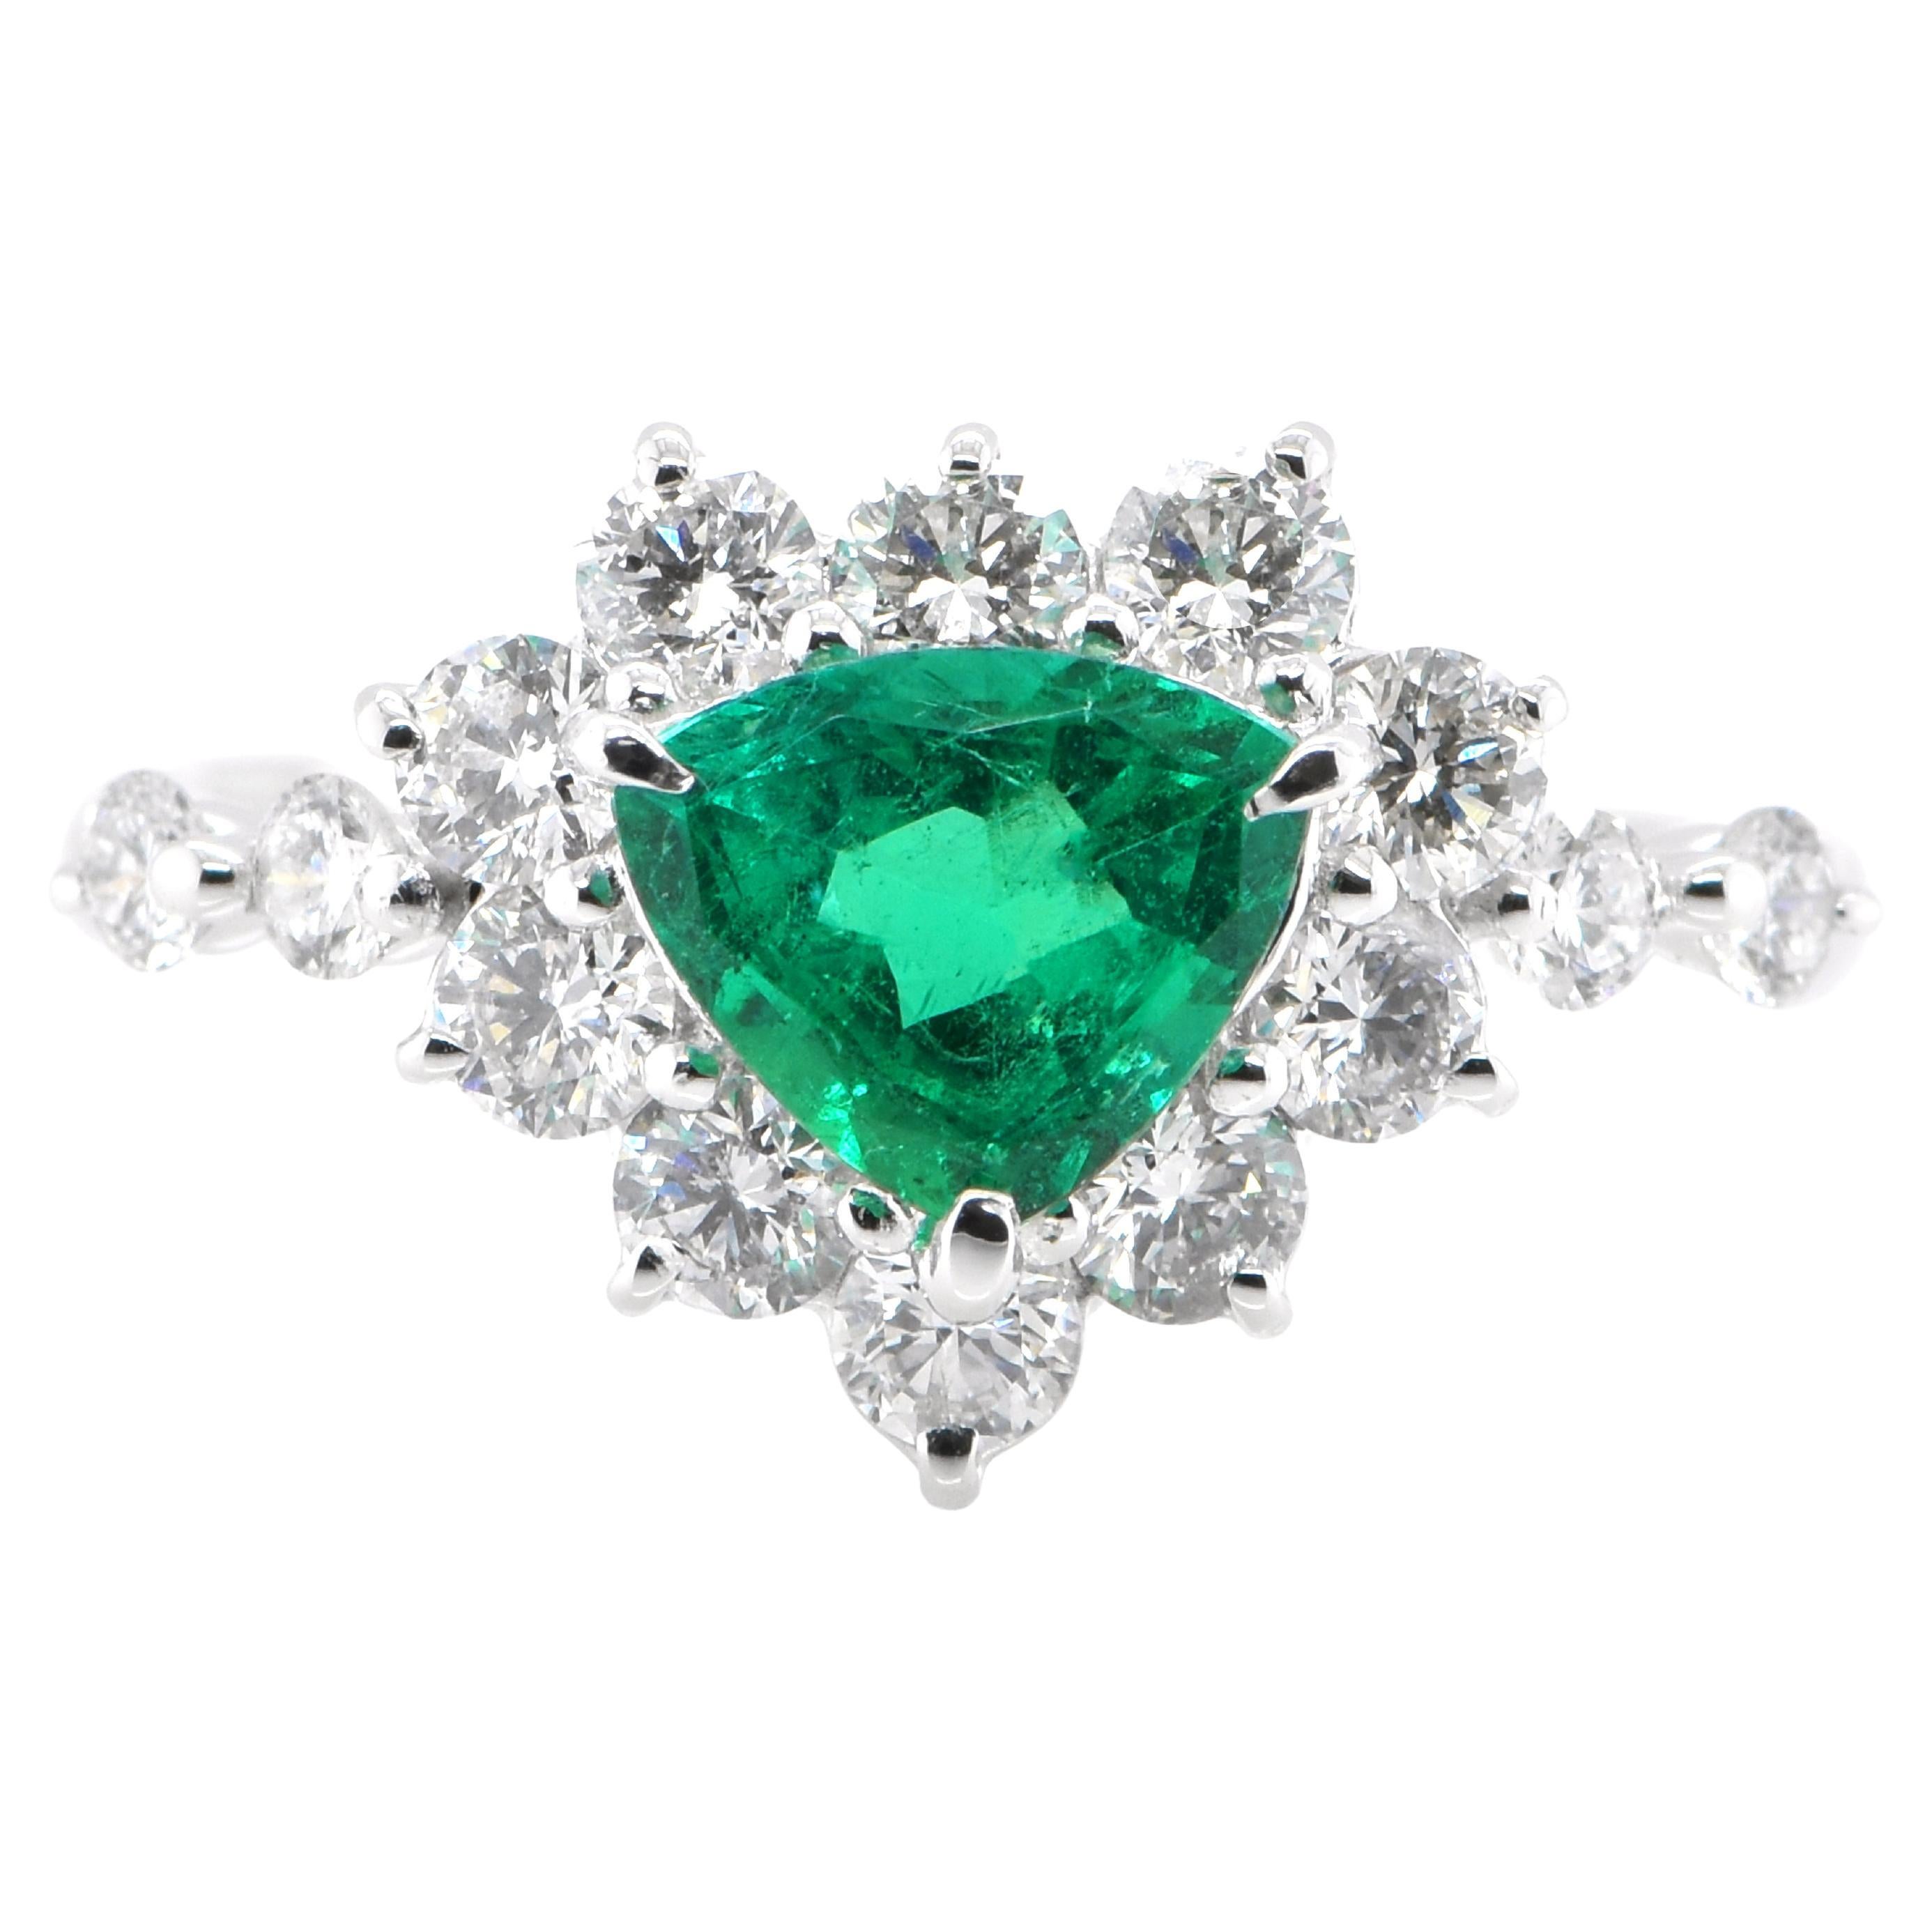  0.83 Carat Natural, Trillion Cut Emerald and Diamond Ring Set in Platinum For Sale